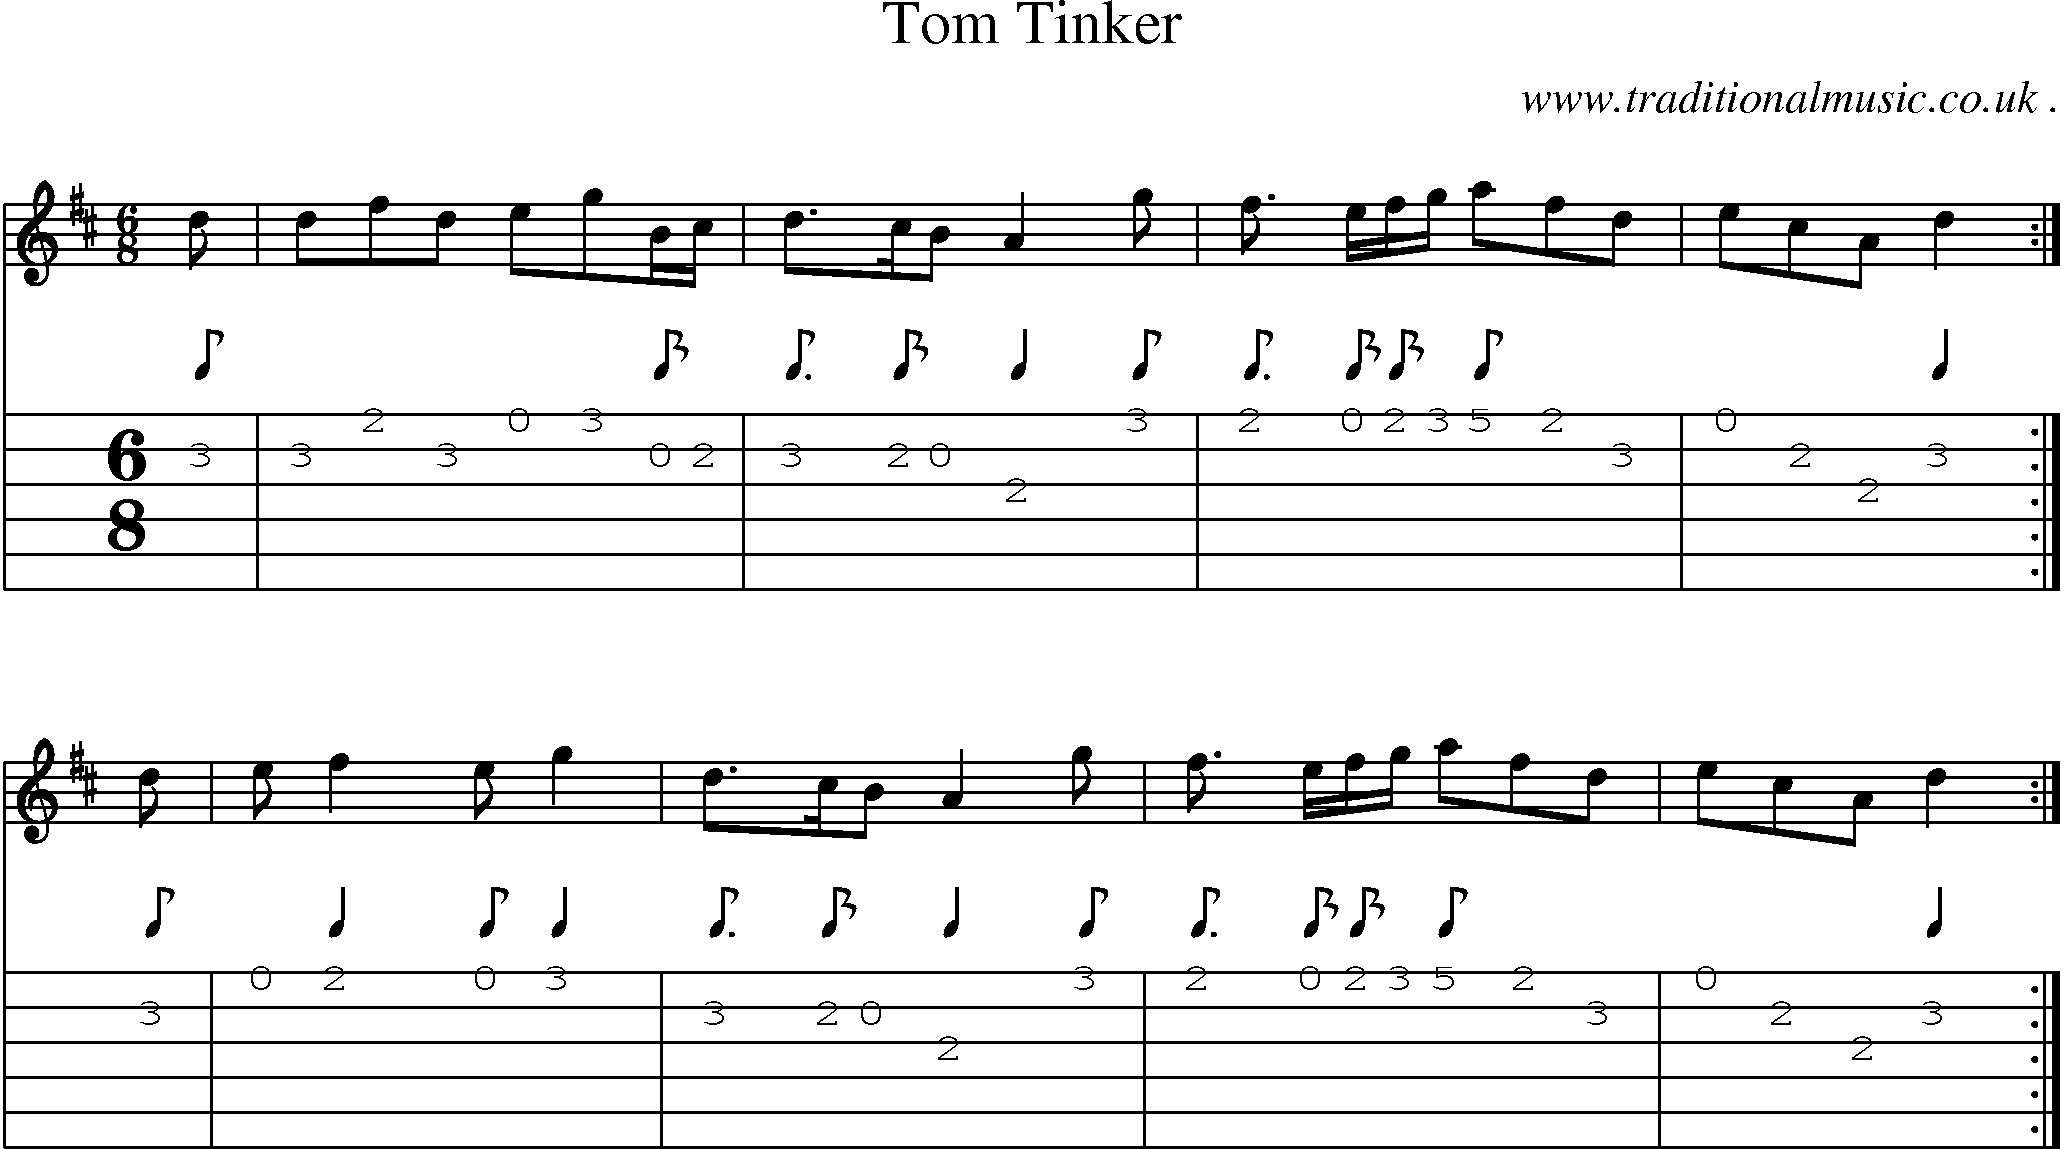 Sheet-music  score, Chords and Guitar Tabs for Tom Tinker